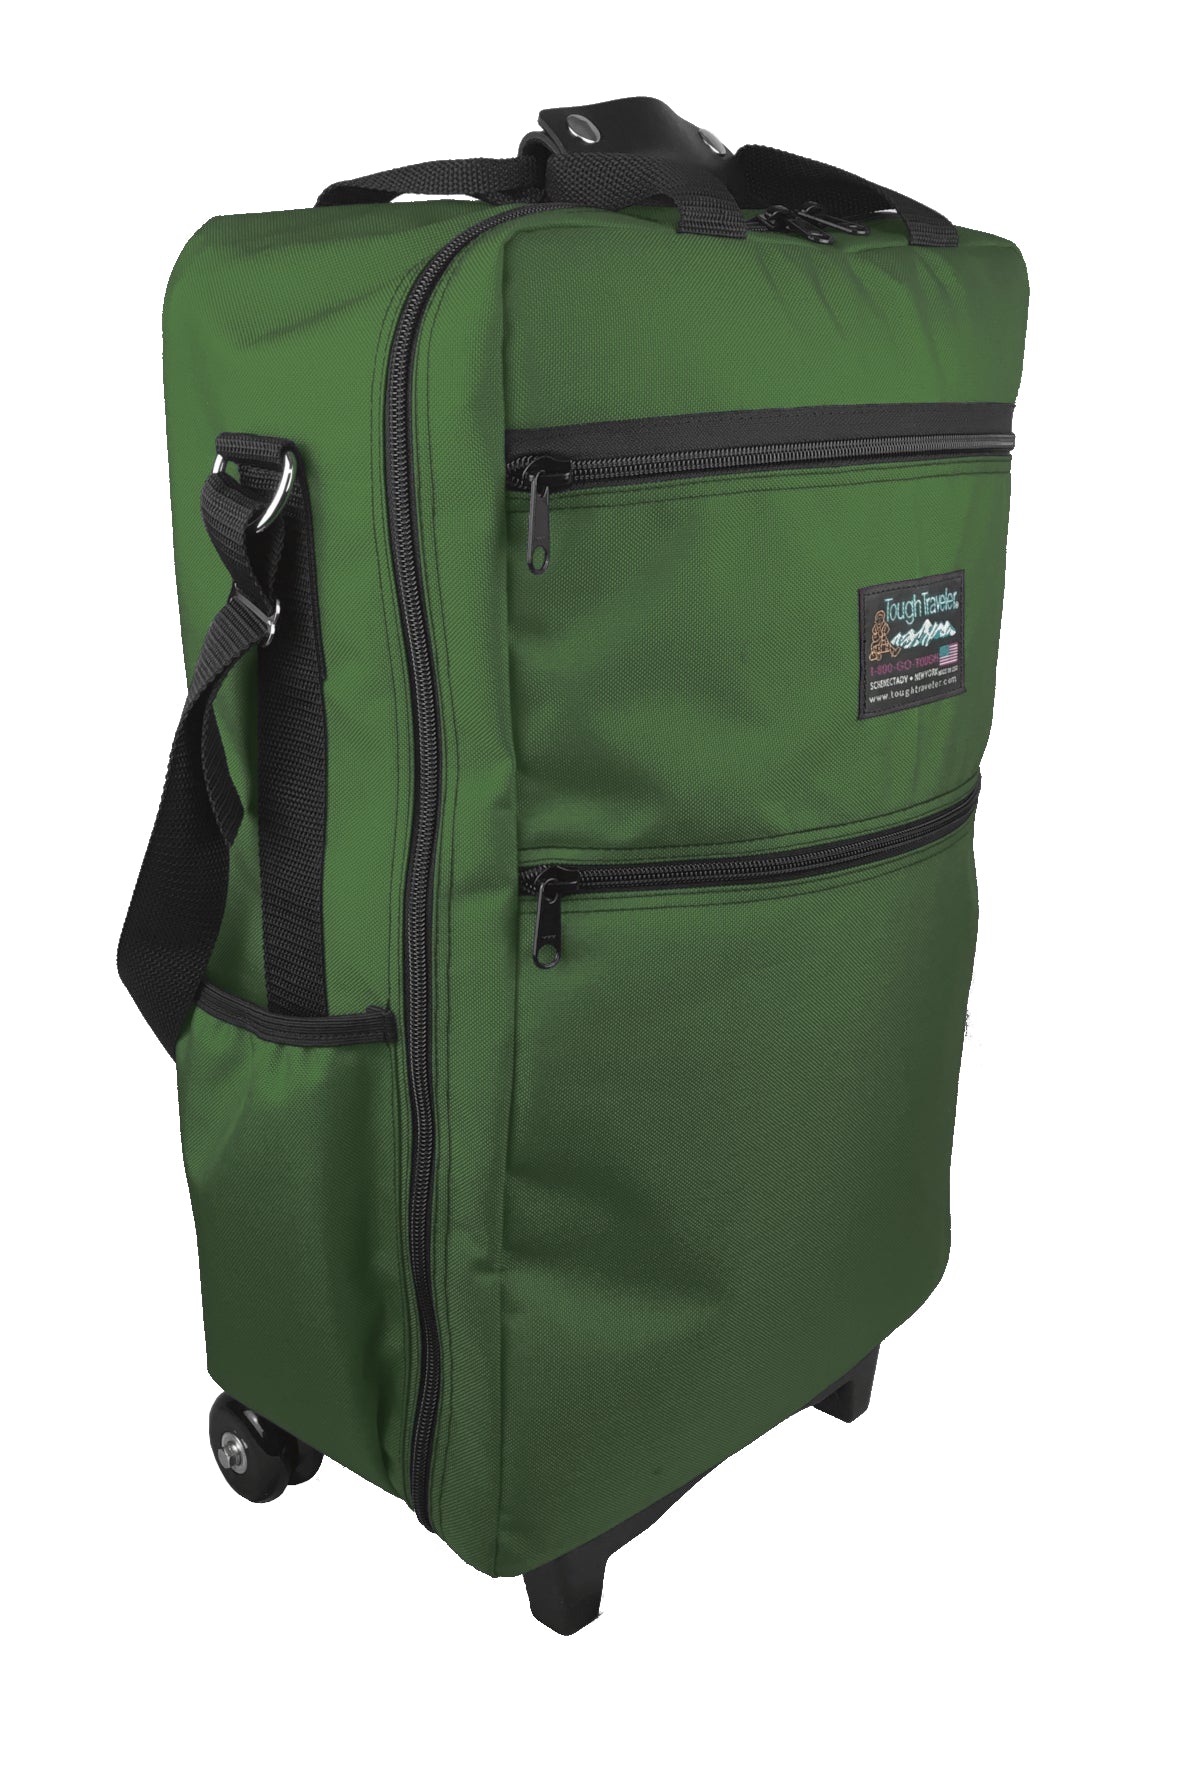 CLIPPER Rolling Luggage | Tough Traveler | Made in USA